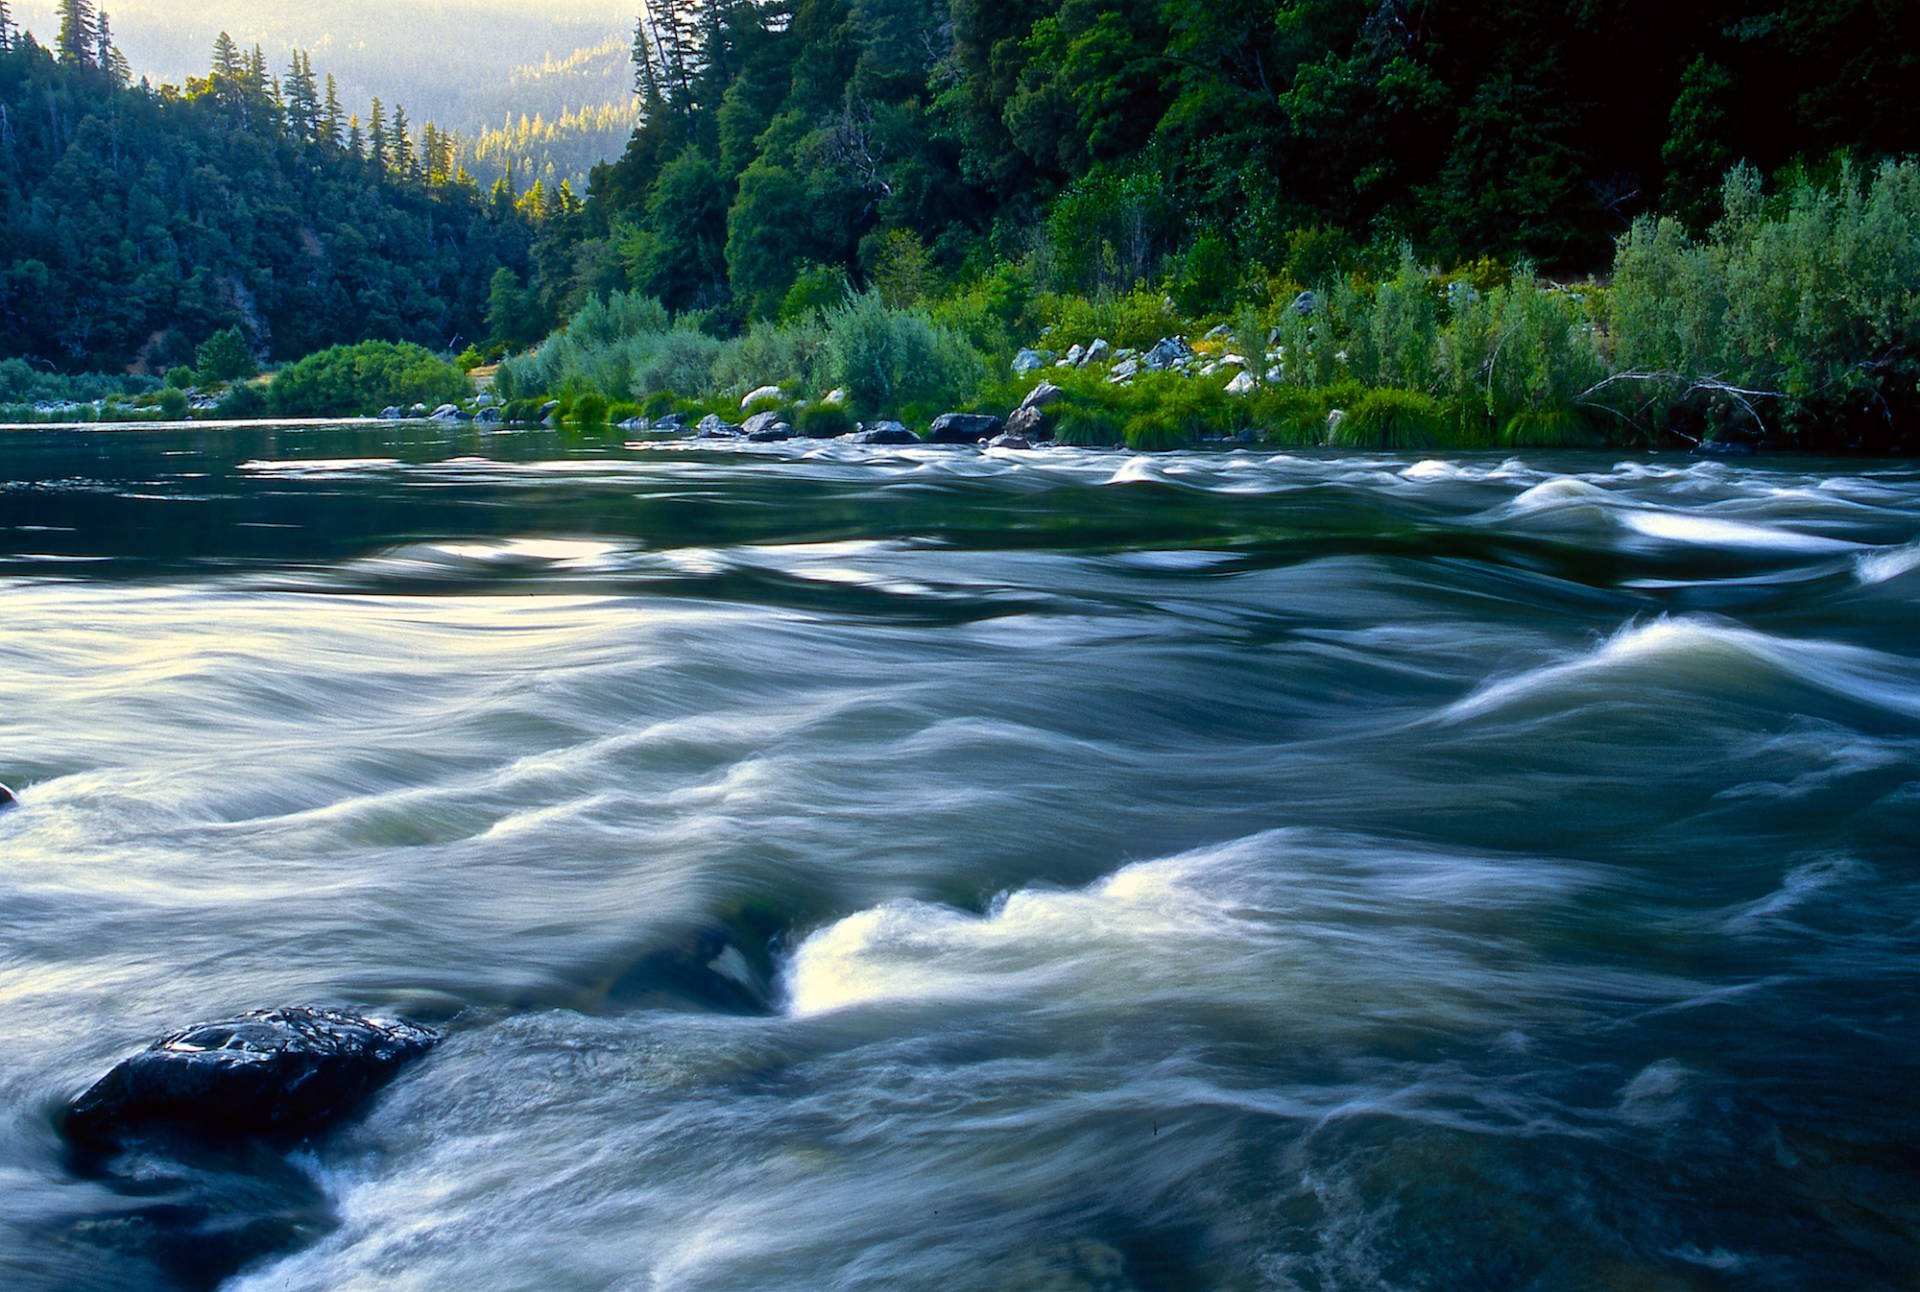 The Klamath River at Eysee Bar, 2003 -- one of the California rivers with federally designated Wild and Scenic portions. Tim Palmer